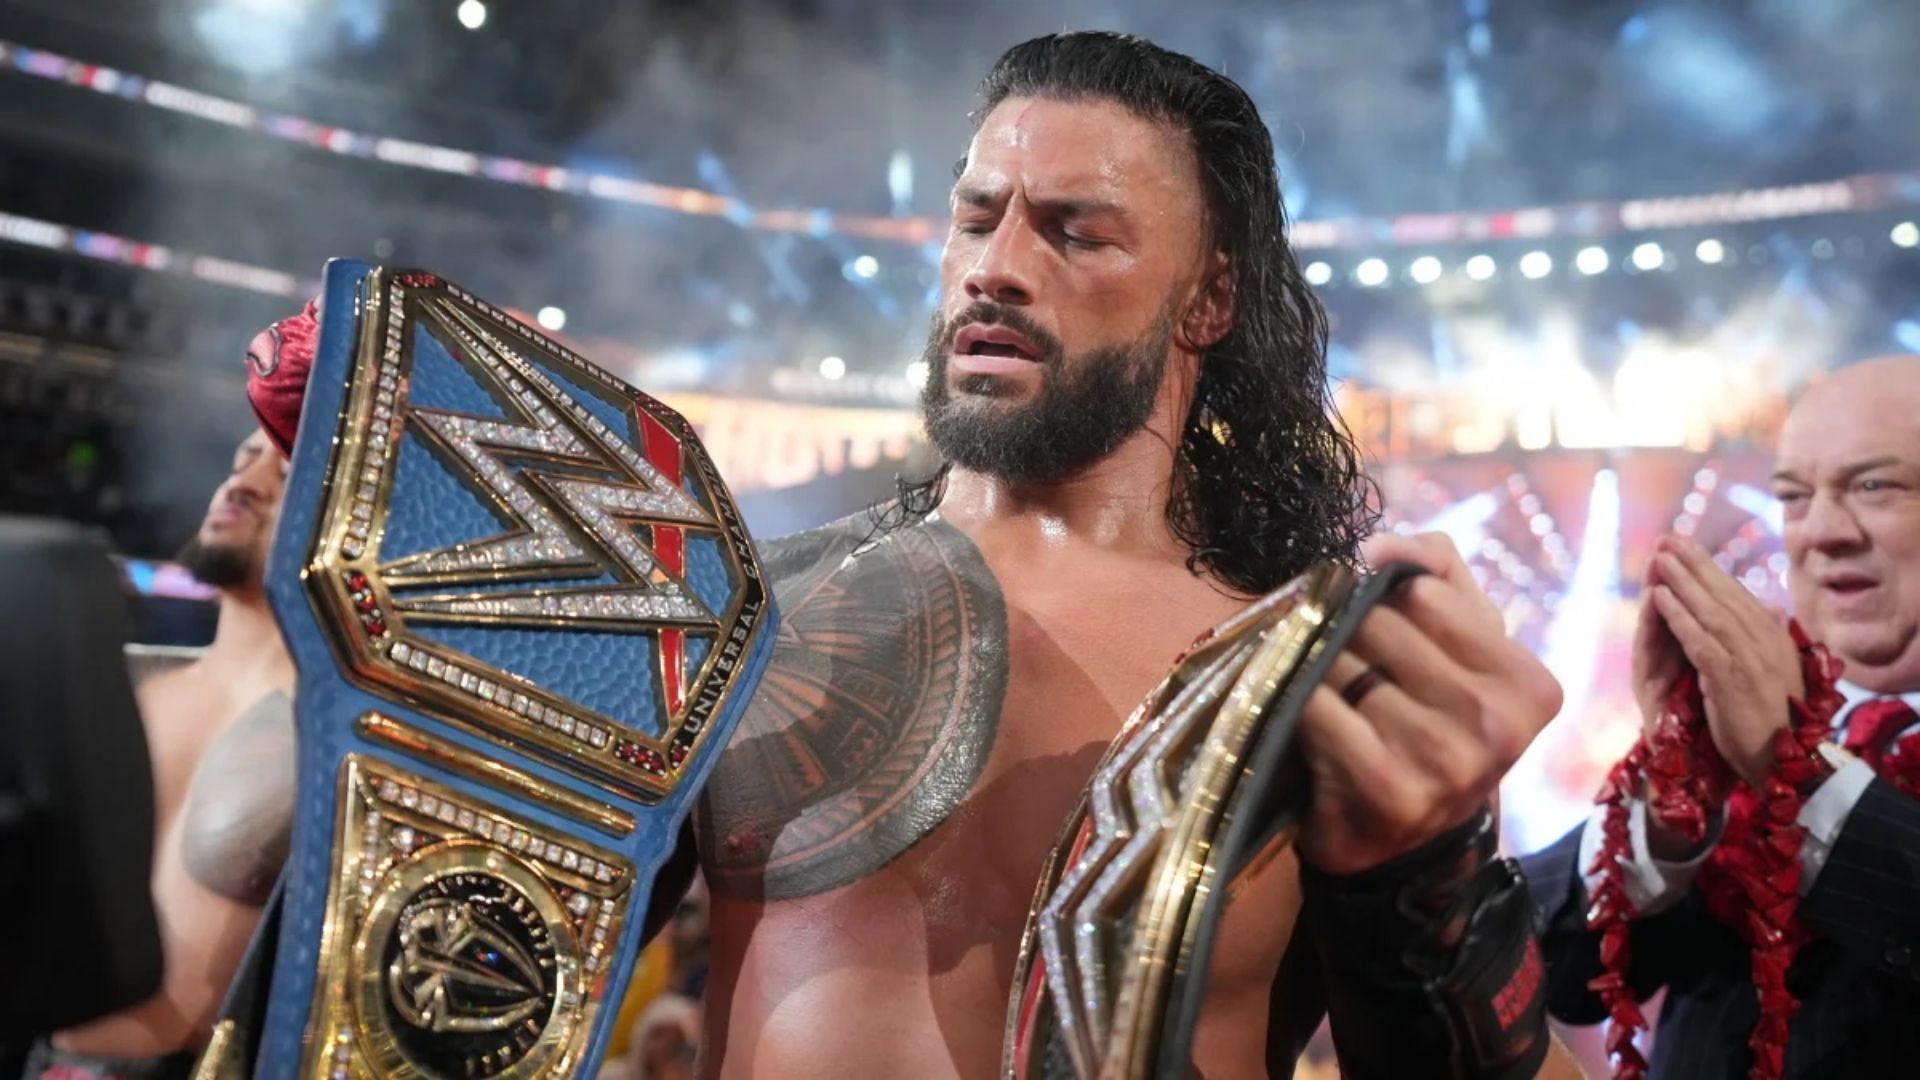 Roman Reigns is the reigning Undisputed WWE Universal Champion. 